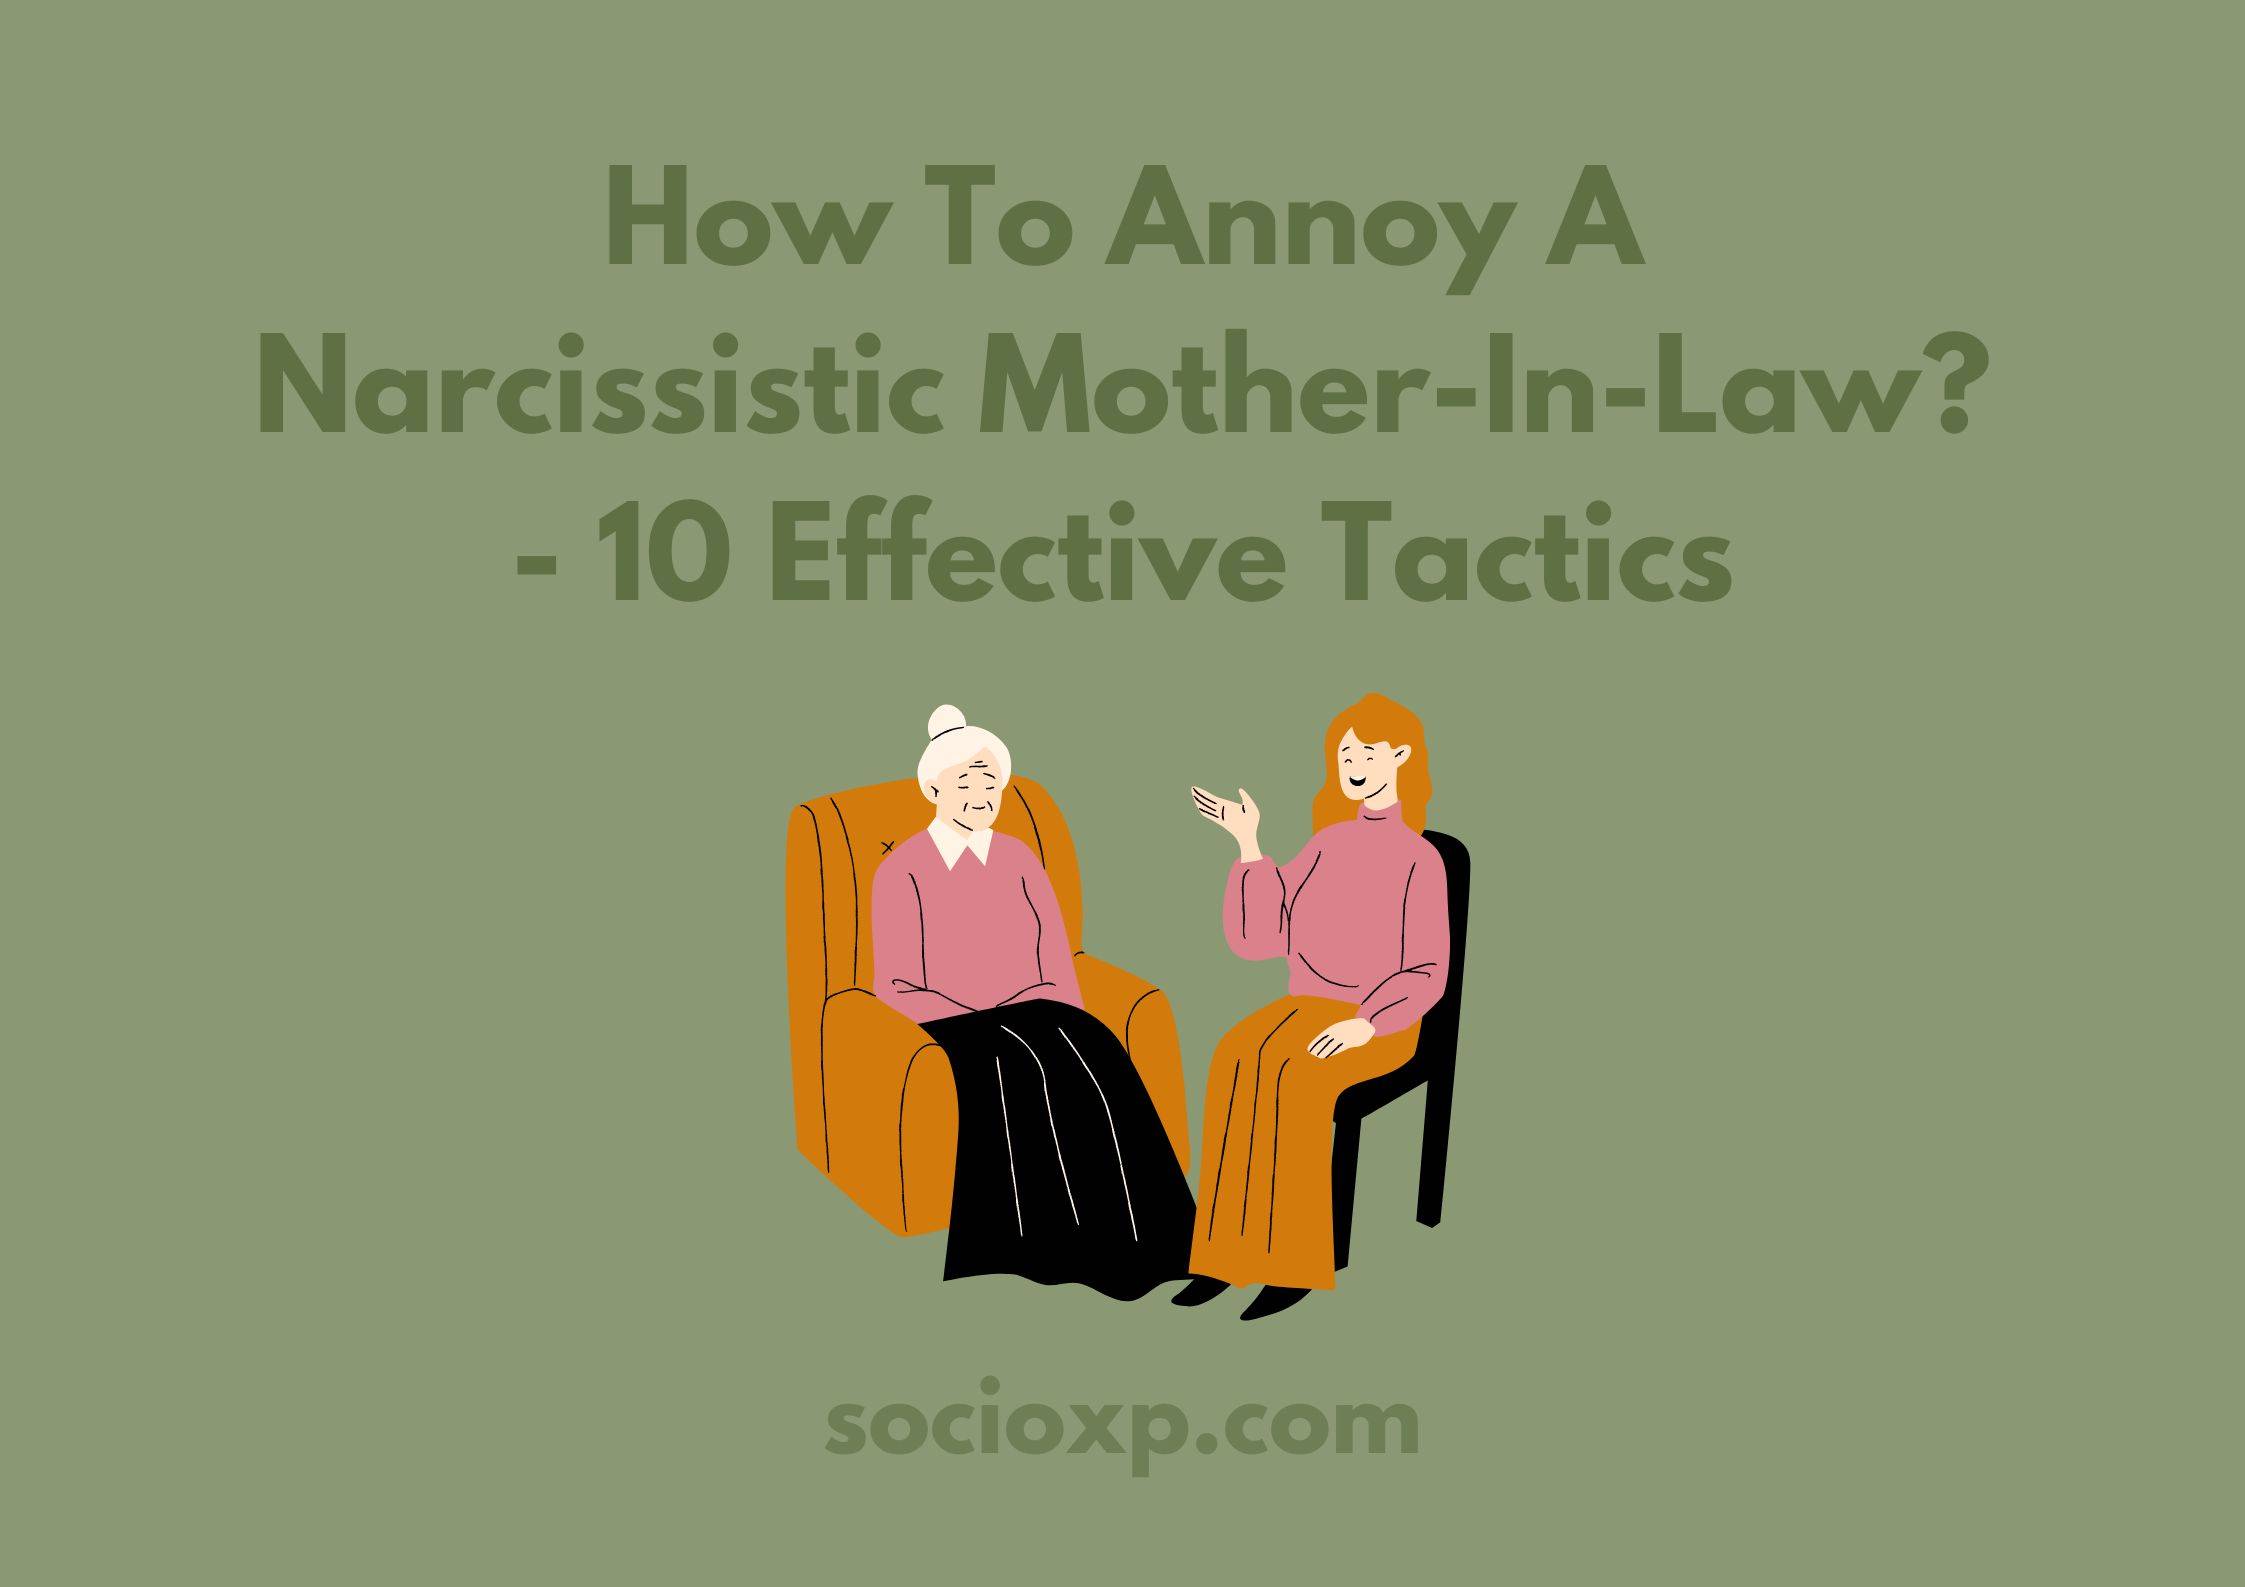 How To Annoy A Narcissistic Mother-In-Law? - 10 Effective Tactics